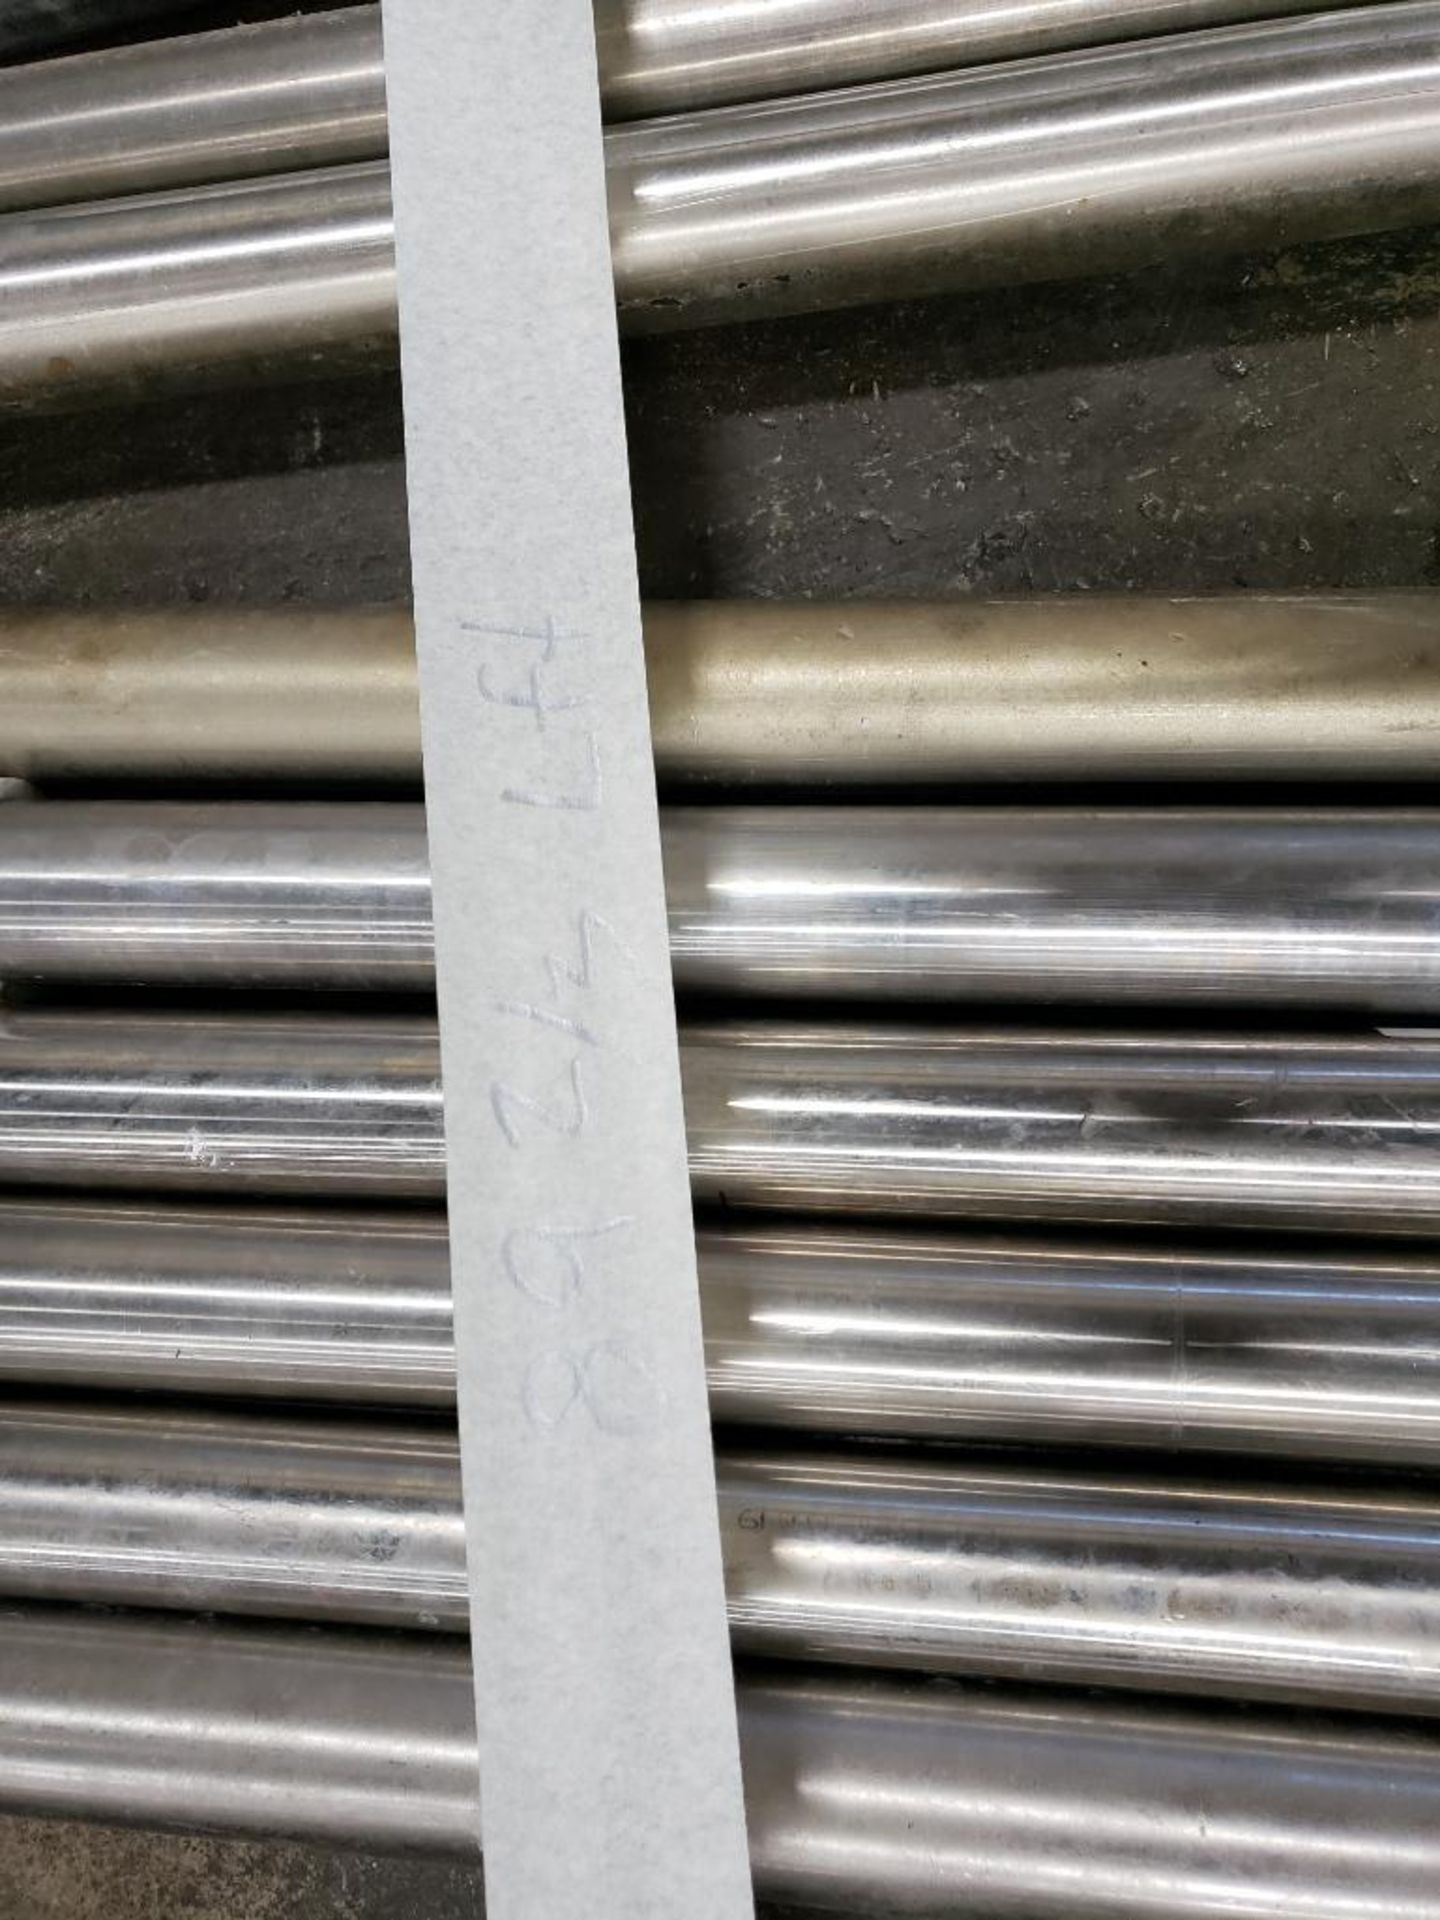 2 inch - Approx 89 total feet of 2in stainless food grade pipe in assorted lengths. - Image 8 of 8